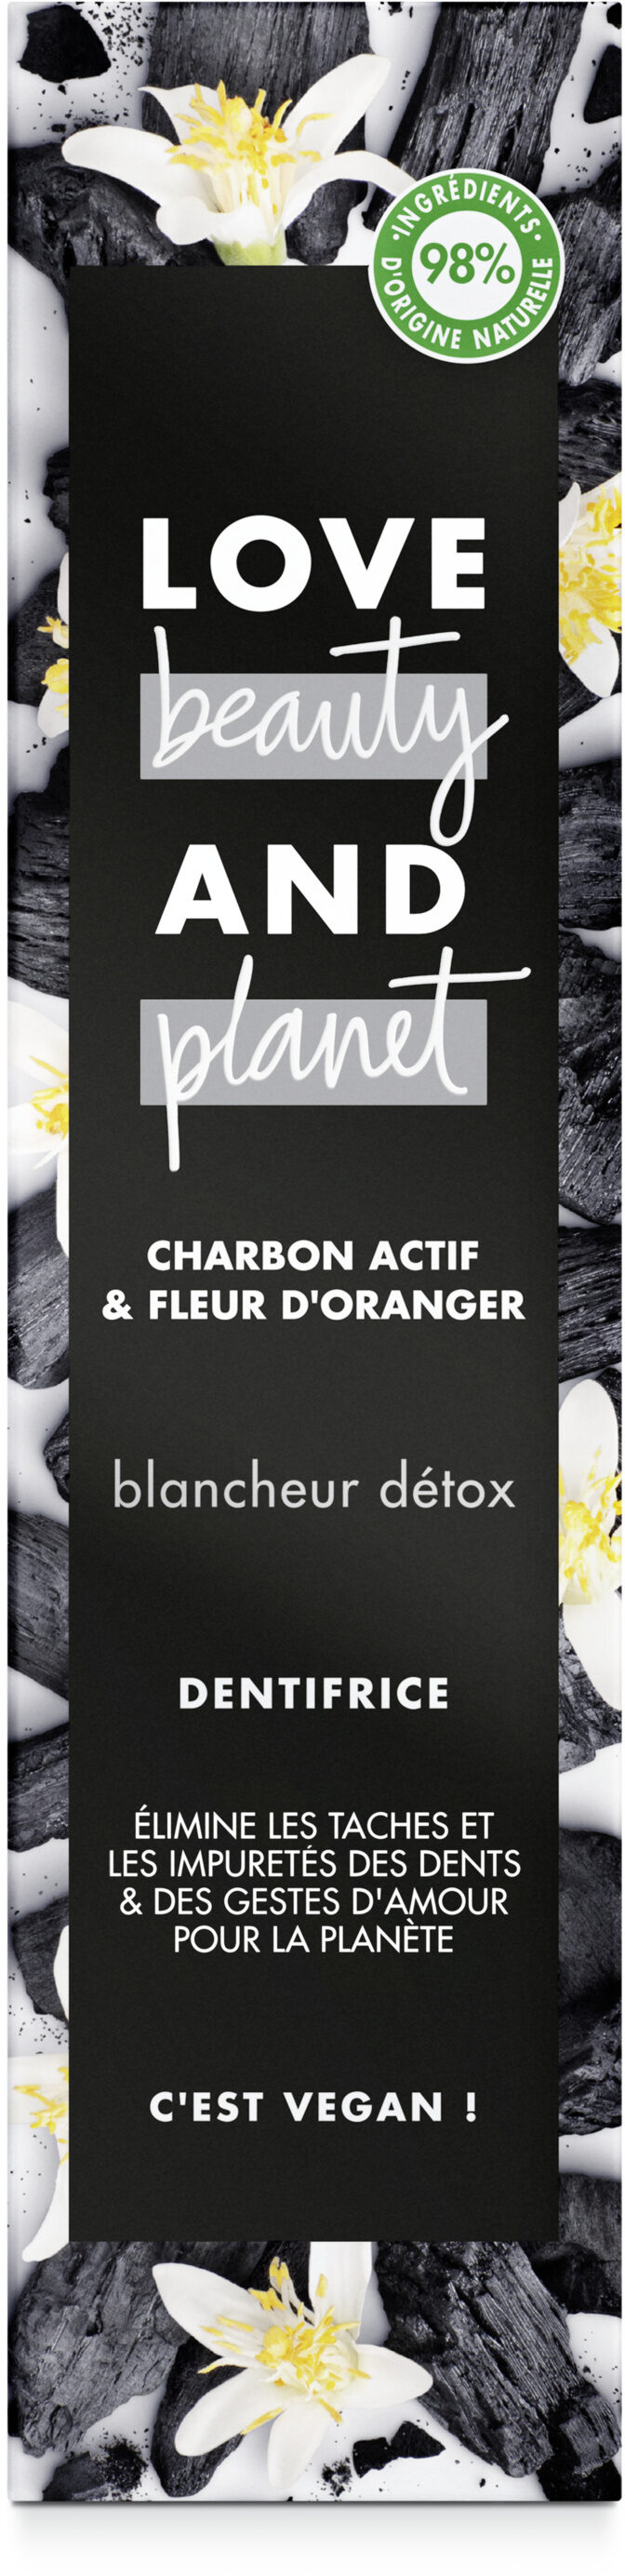 Love Beauty And Planet Dentifrice Blancheur Détox - Product - fr